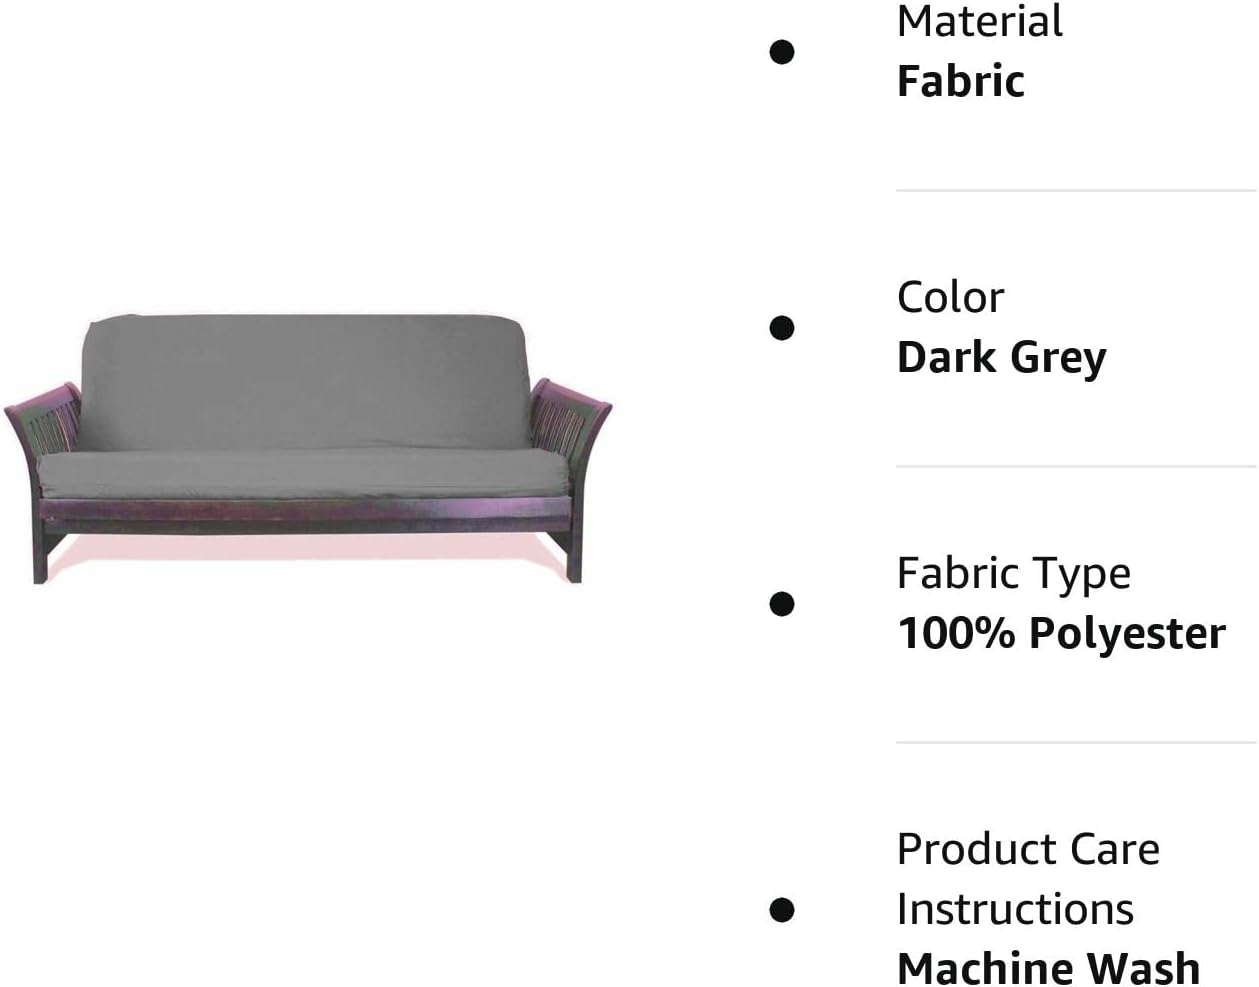 Queen Size 60"x80"Solid Futon Cover Mattresses Slipcover Fit 6"- 8", Dark Grey - image 3 of 3